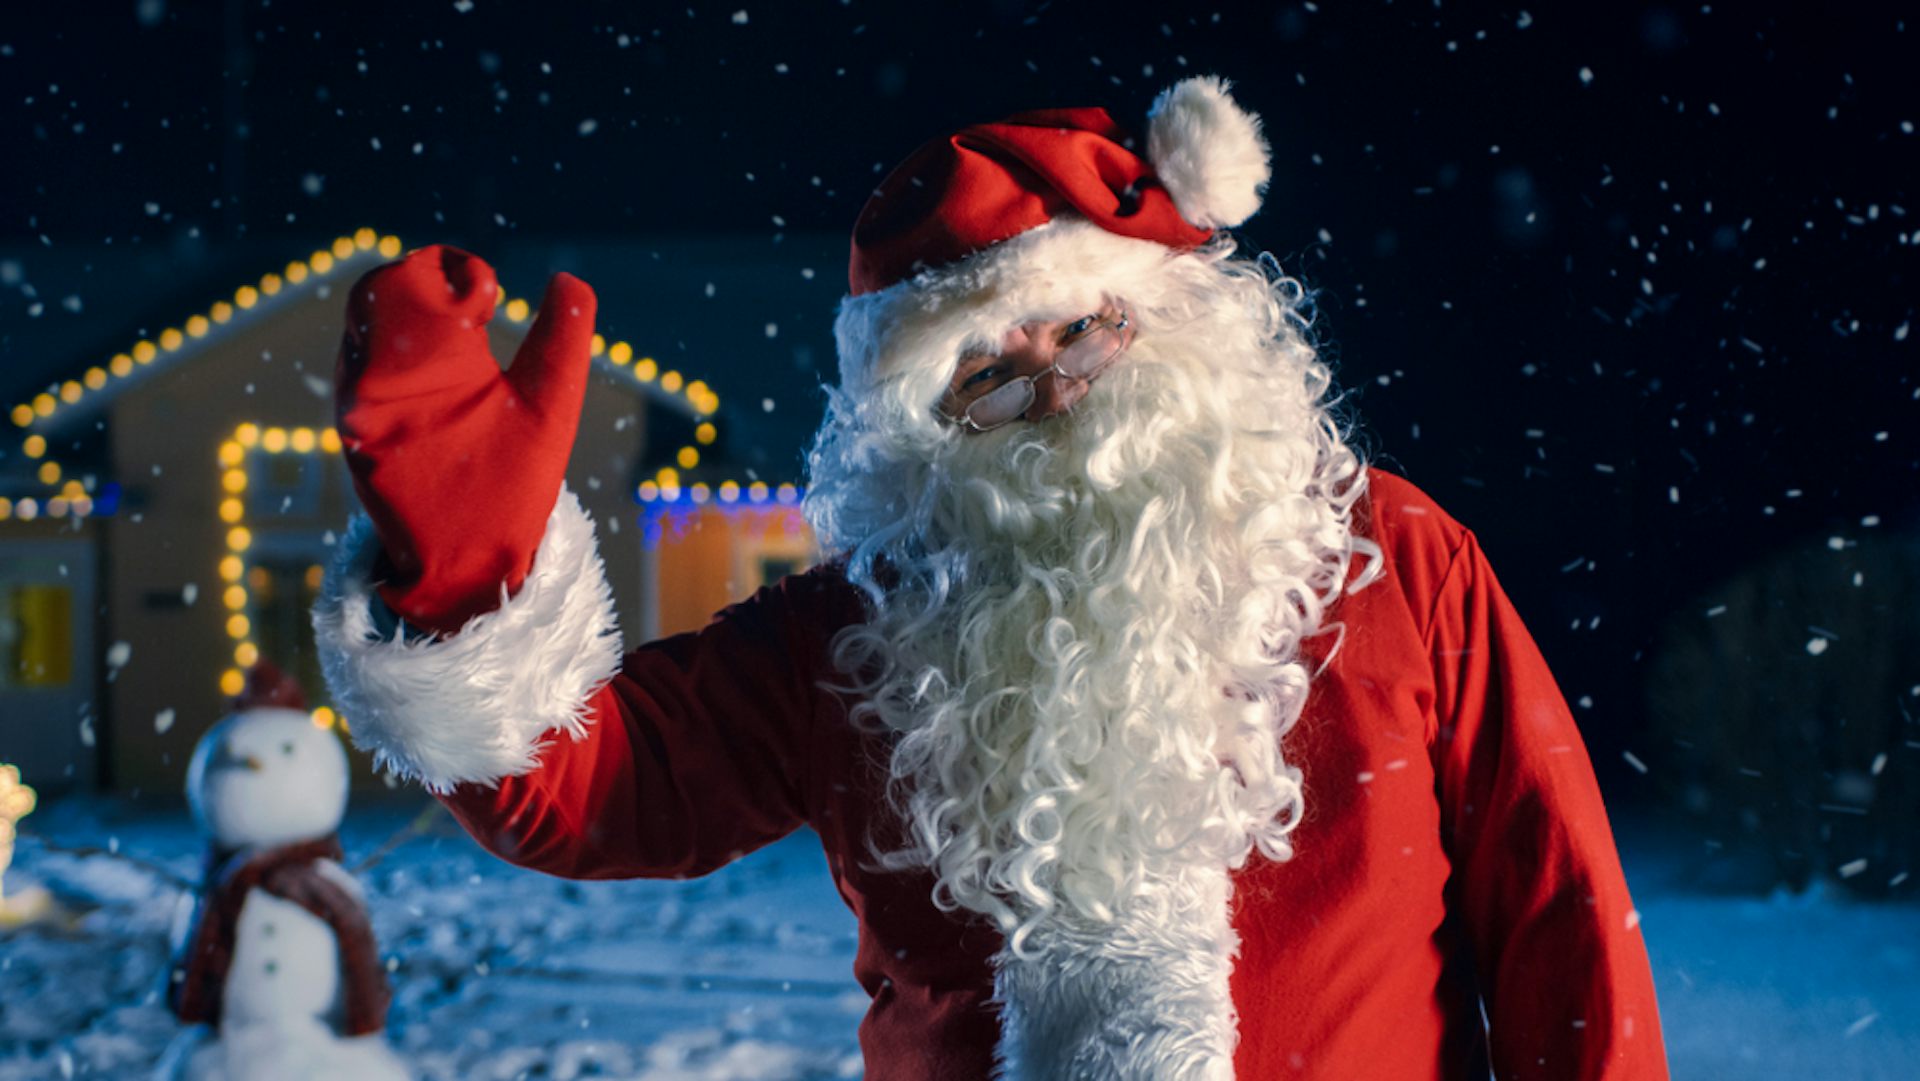 The business of Santa Claus in Lapland 